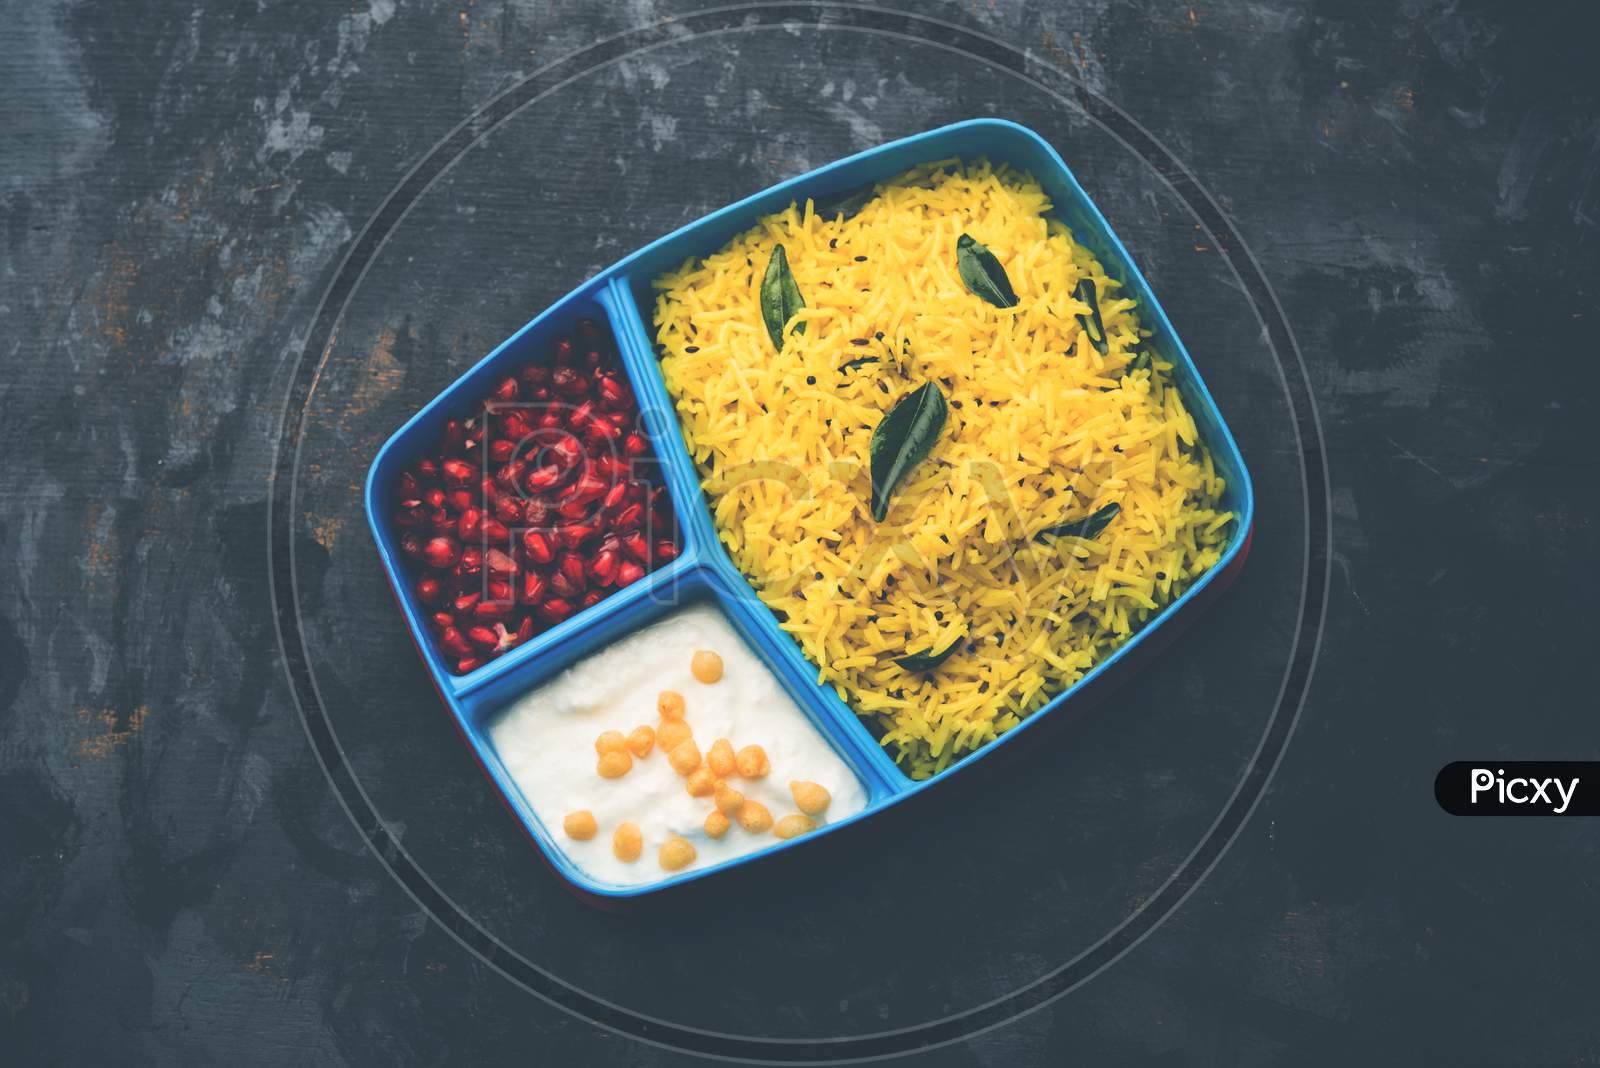 Lunch Box / Tiffin for Indian kids, contains lemon rice, nahi-boondi and pomegranate or Anar. selective focus